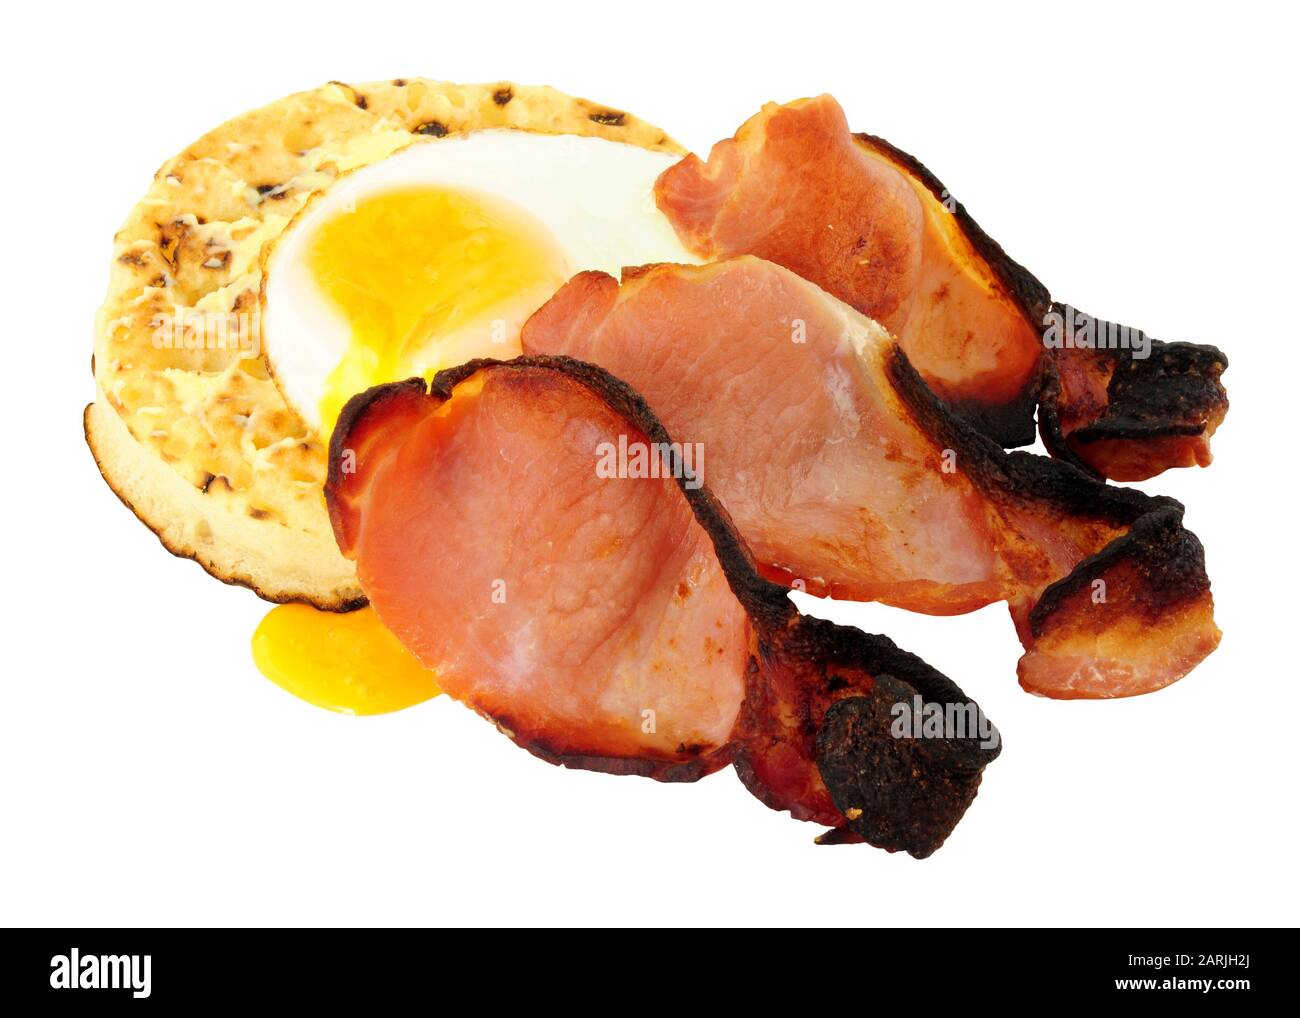 Fried egg and smoked bacon rashers on a large English crumpet isolated on a white background Stock Photo